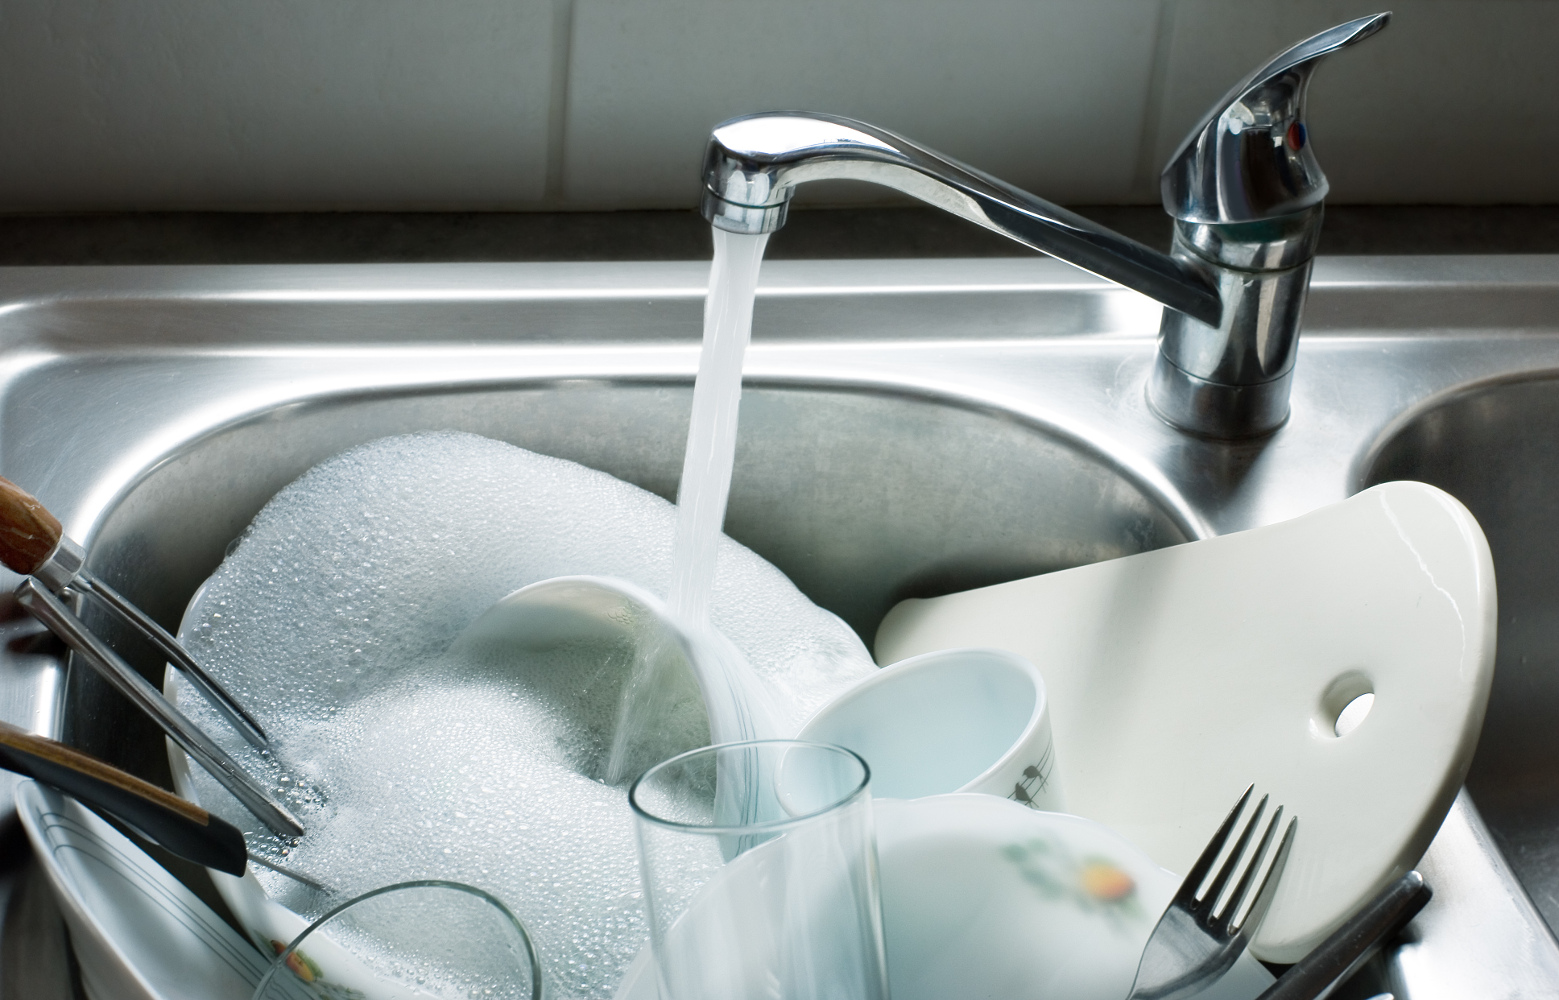 Hand Washing Dishes vs Dishwasher Comparison - Advanced Water Solutions